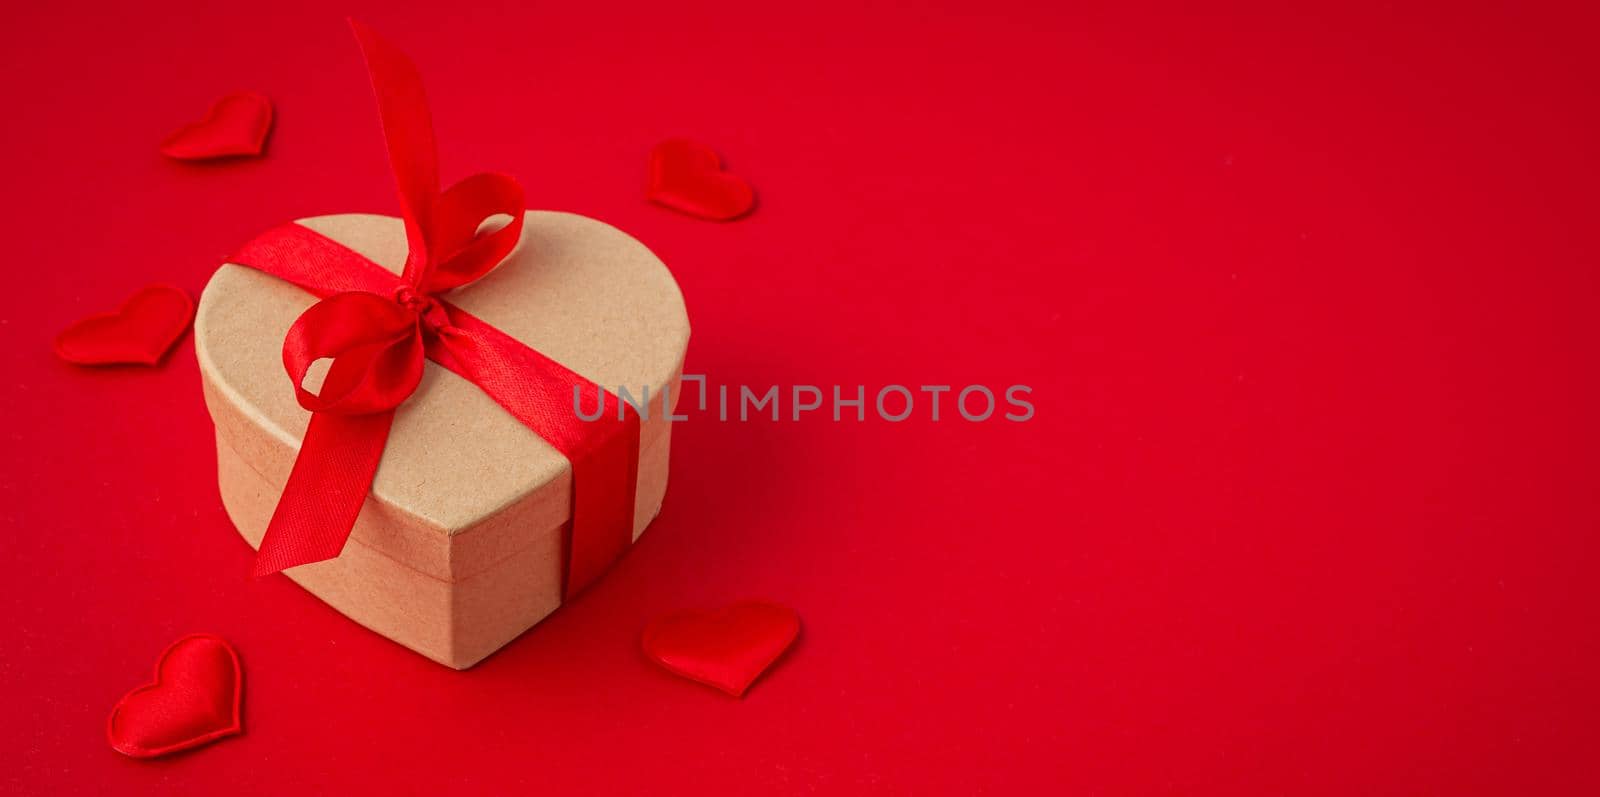 Gift boxe in heart shape with bow on red background, Saint Valentine Day by its_al_dente